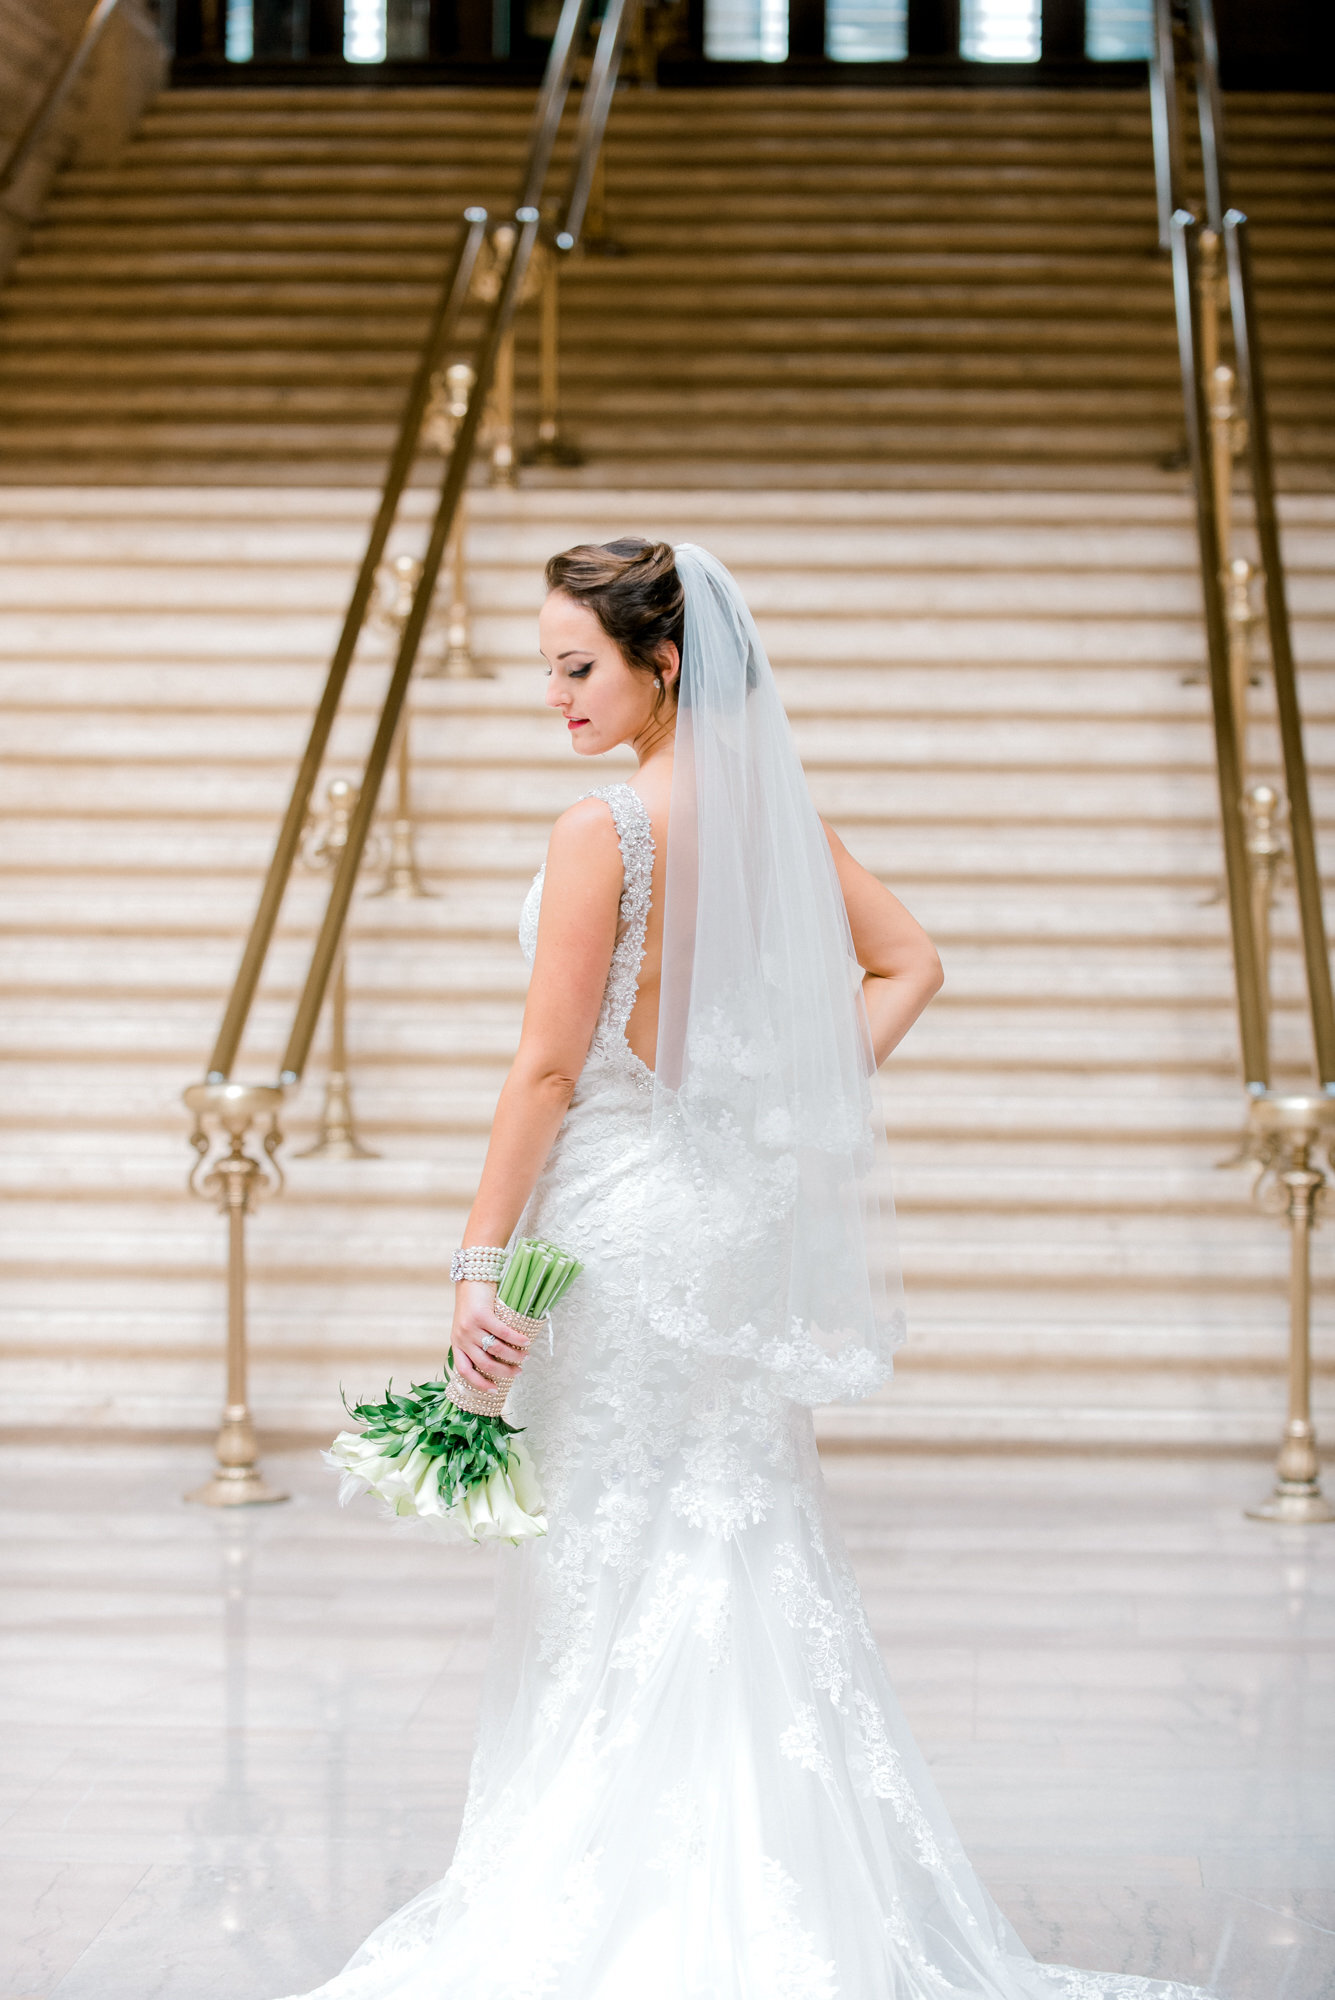 union station Chicago picture by Chicago wedding photographer